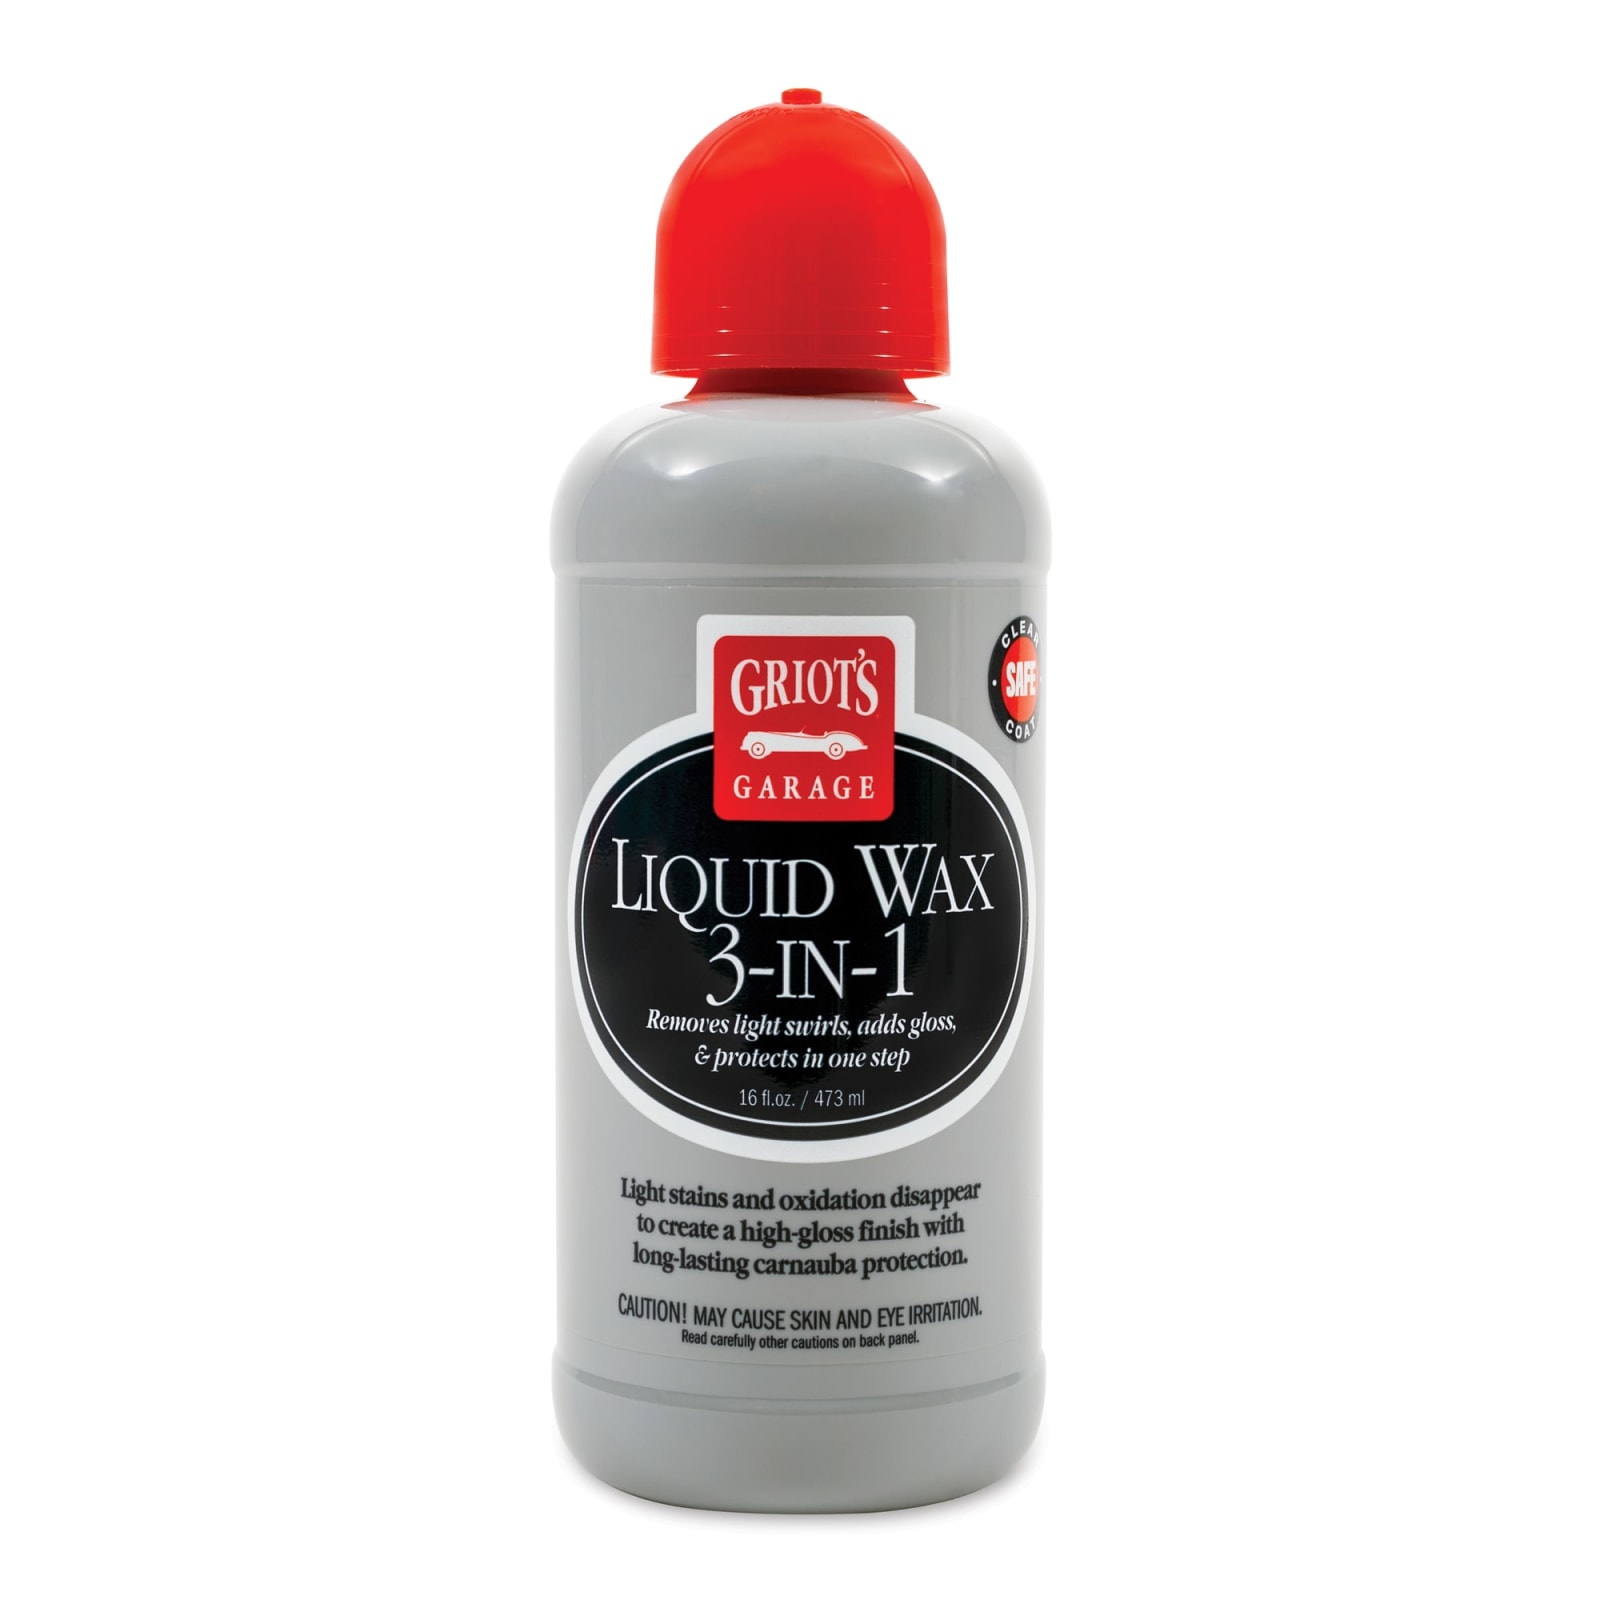 Ceramic 3-in-1 Wax  Protection & Shine - Griot's Garage